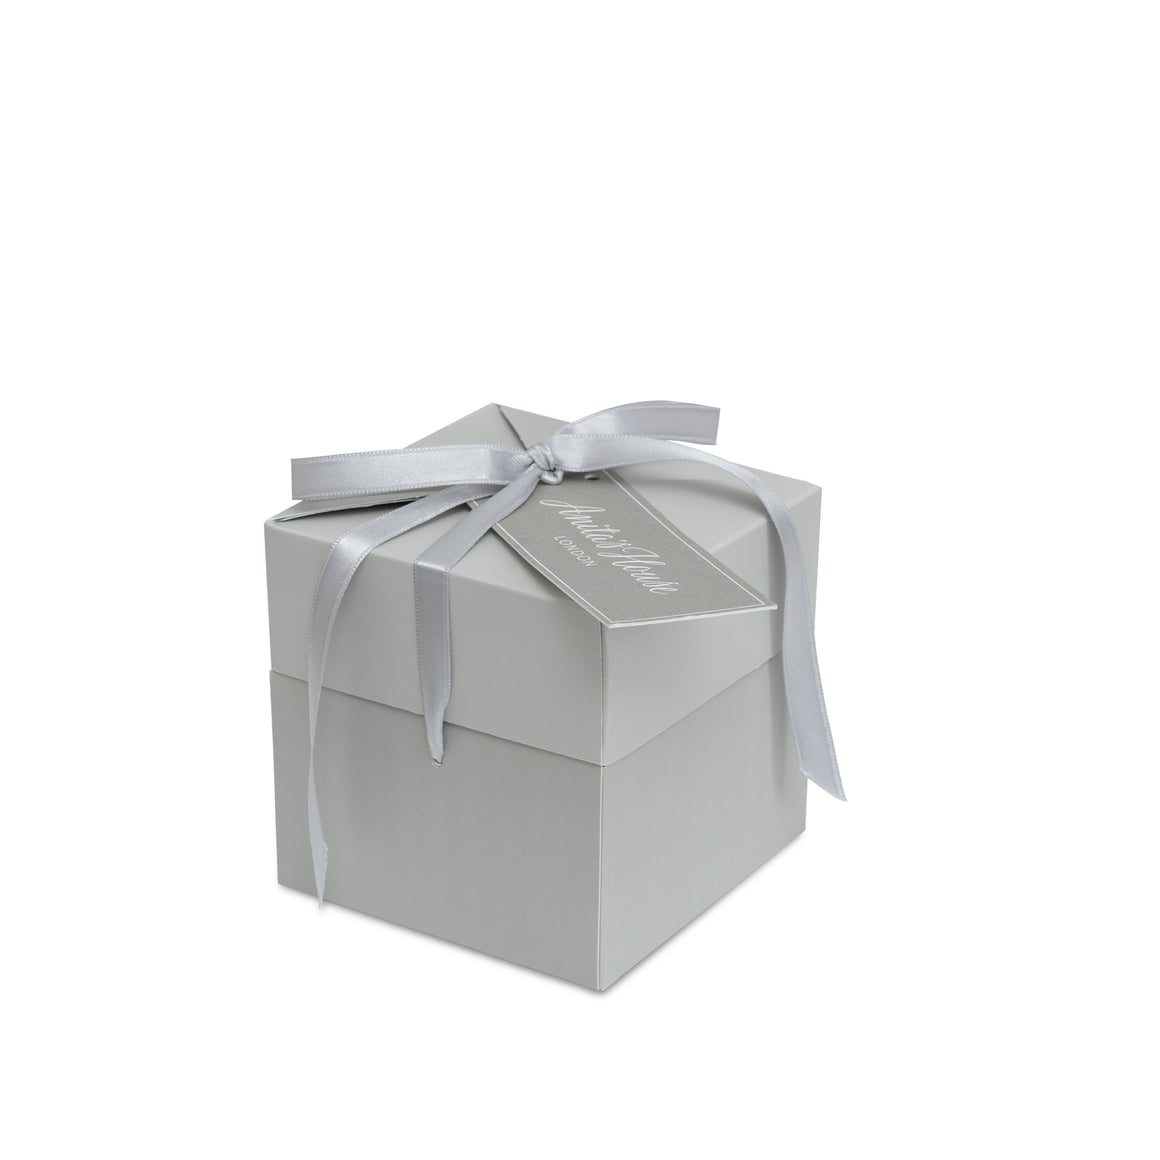 Anita's House Gift Boxes - Your complimentary Anita's House Gift Box ready for you to fill!